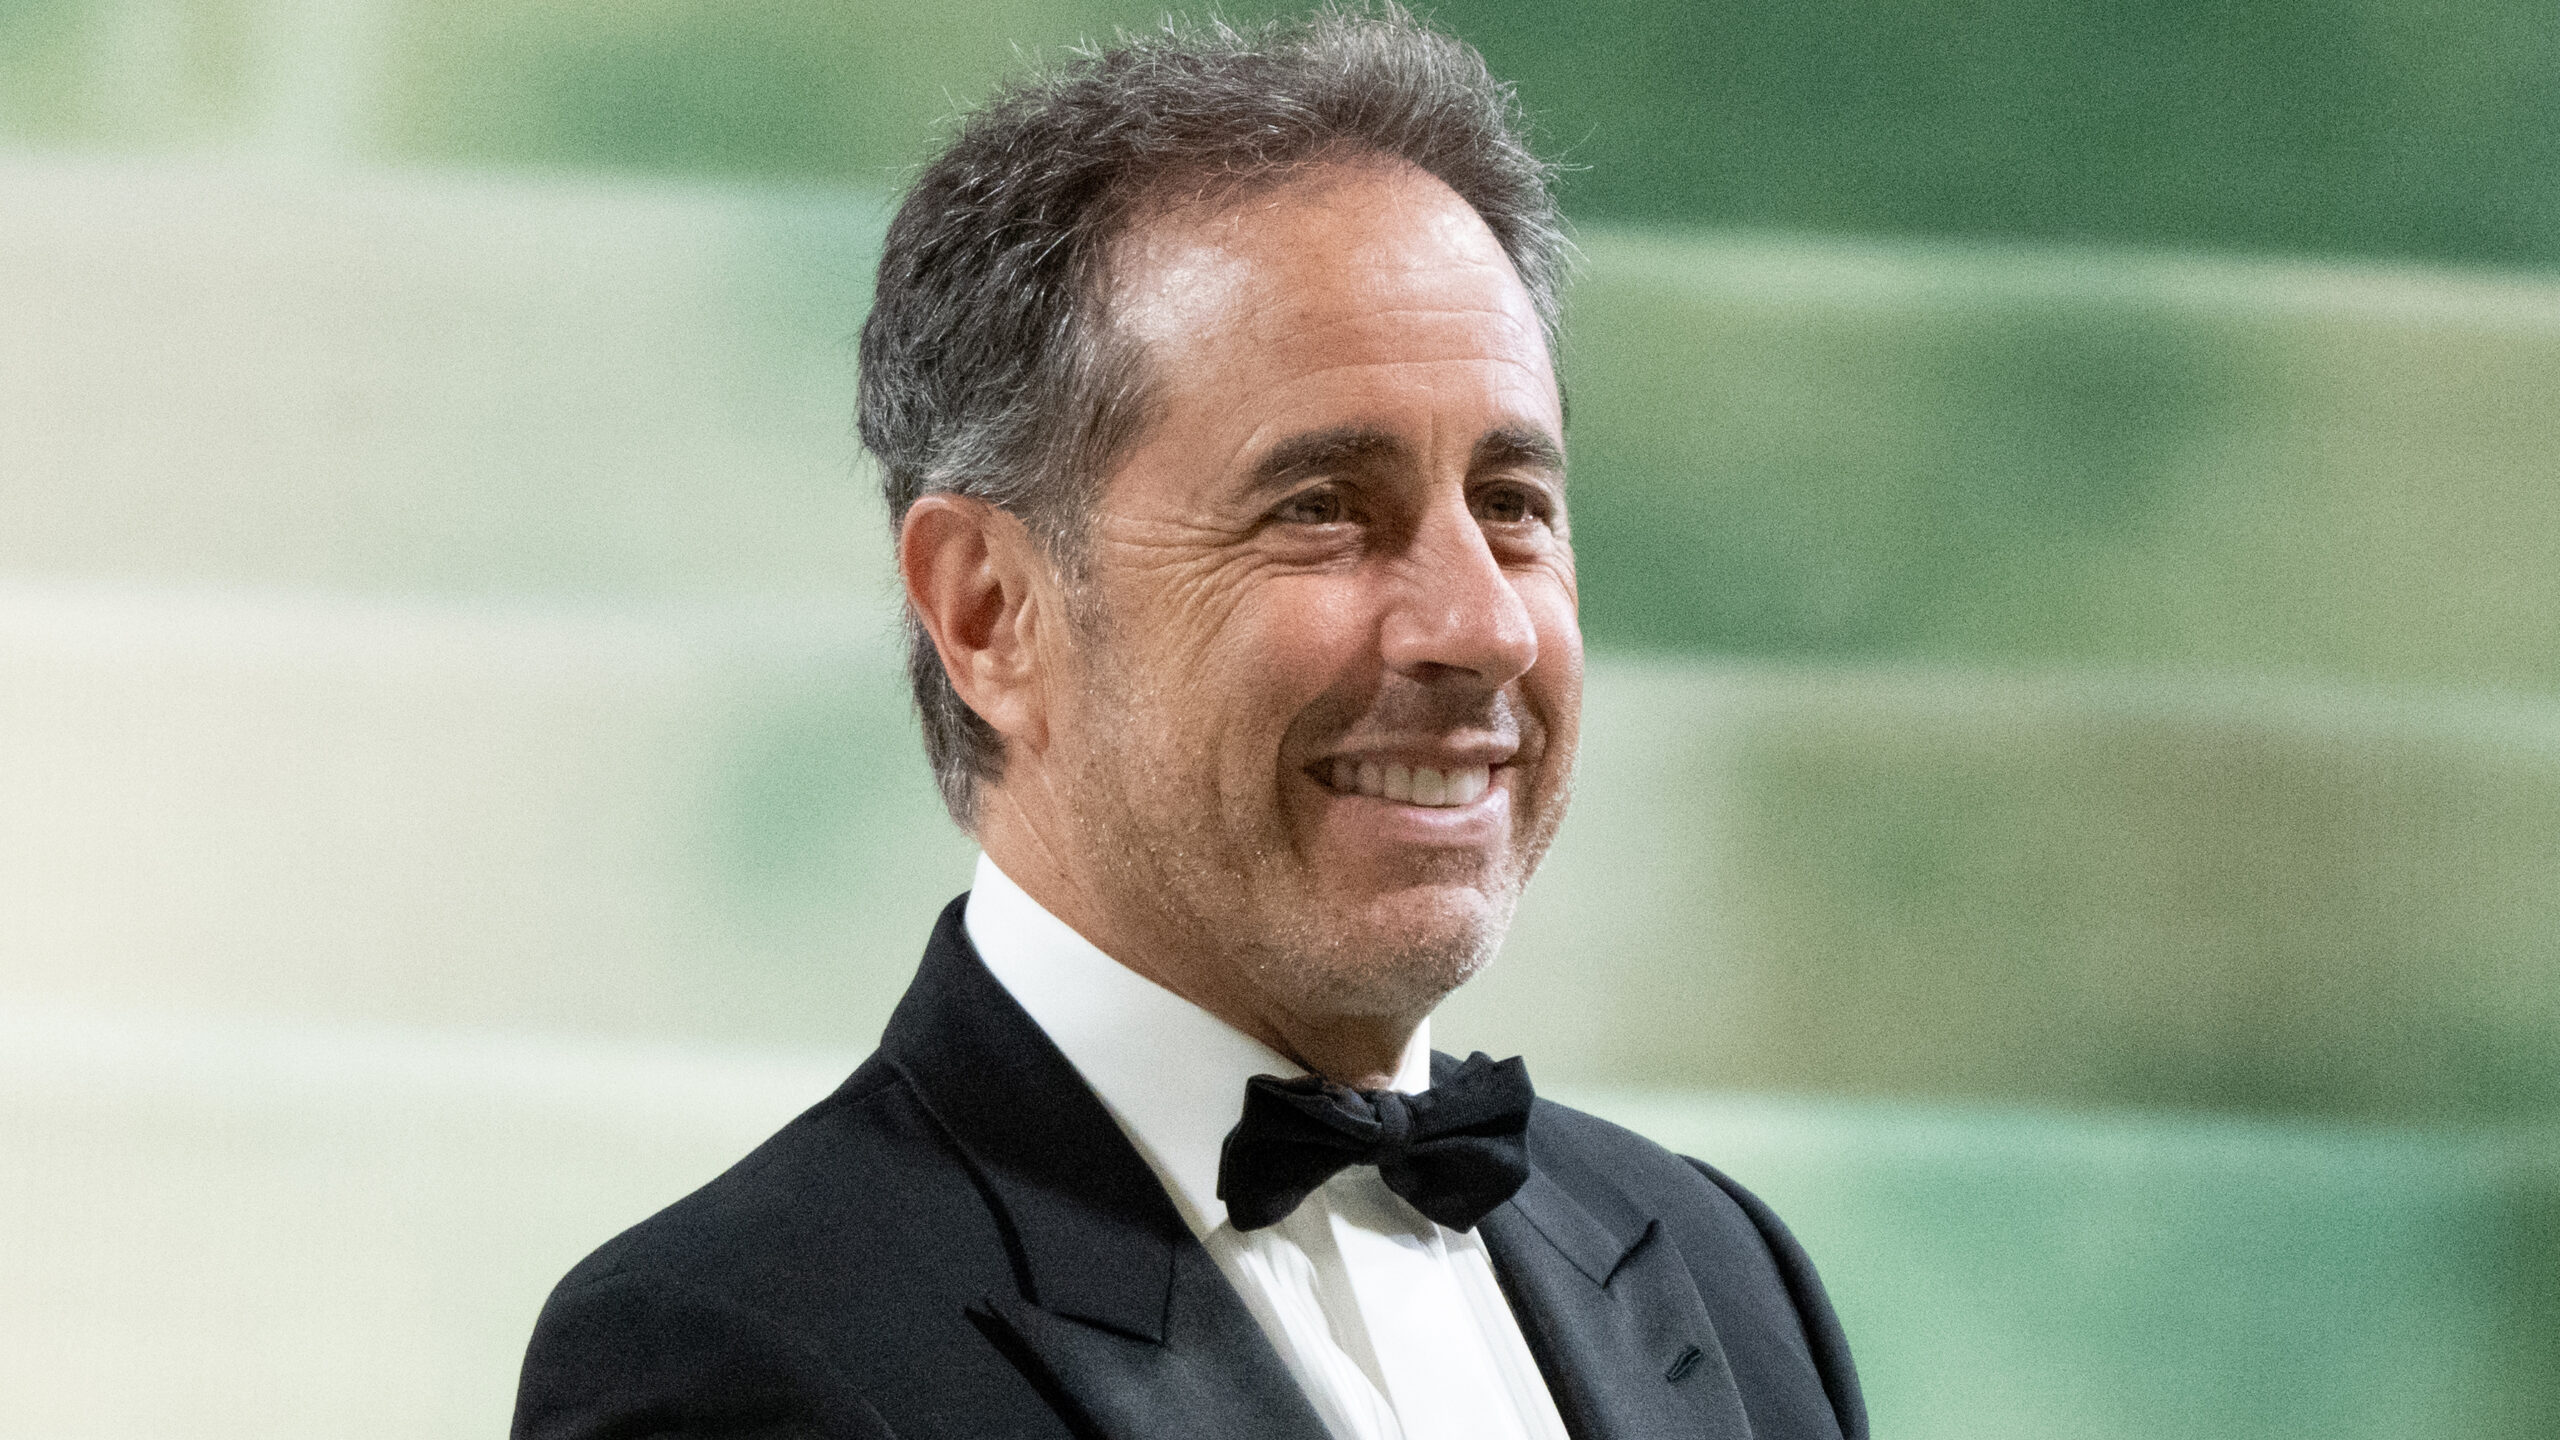 Jerry Seinfeld Scolds Pro-Palestinian Heckler: “It’s a comedy show, you moron. Get out of here.